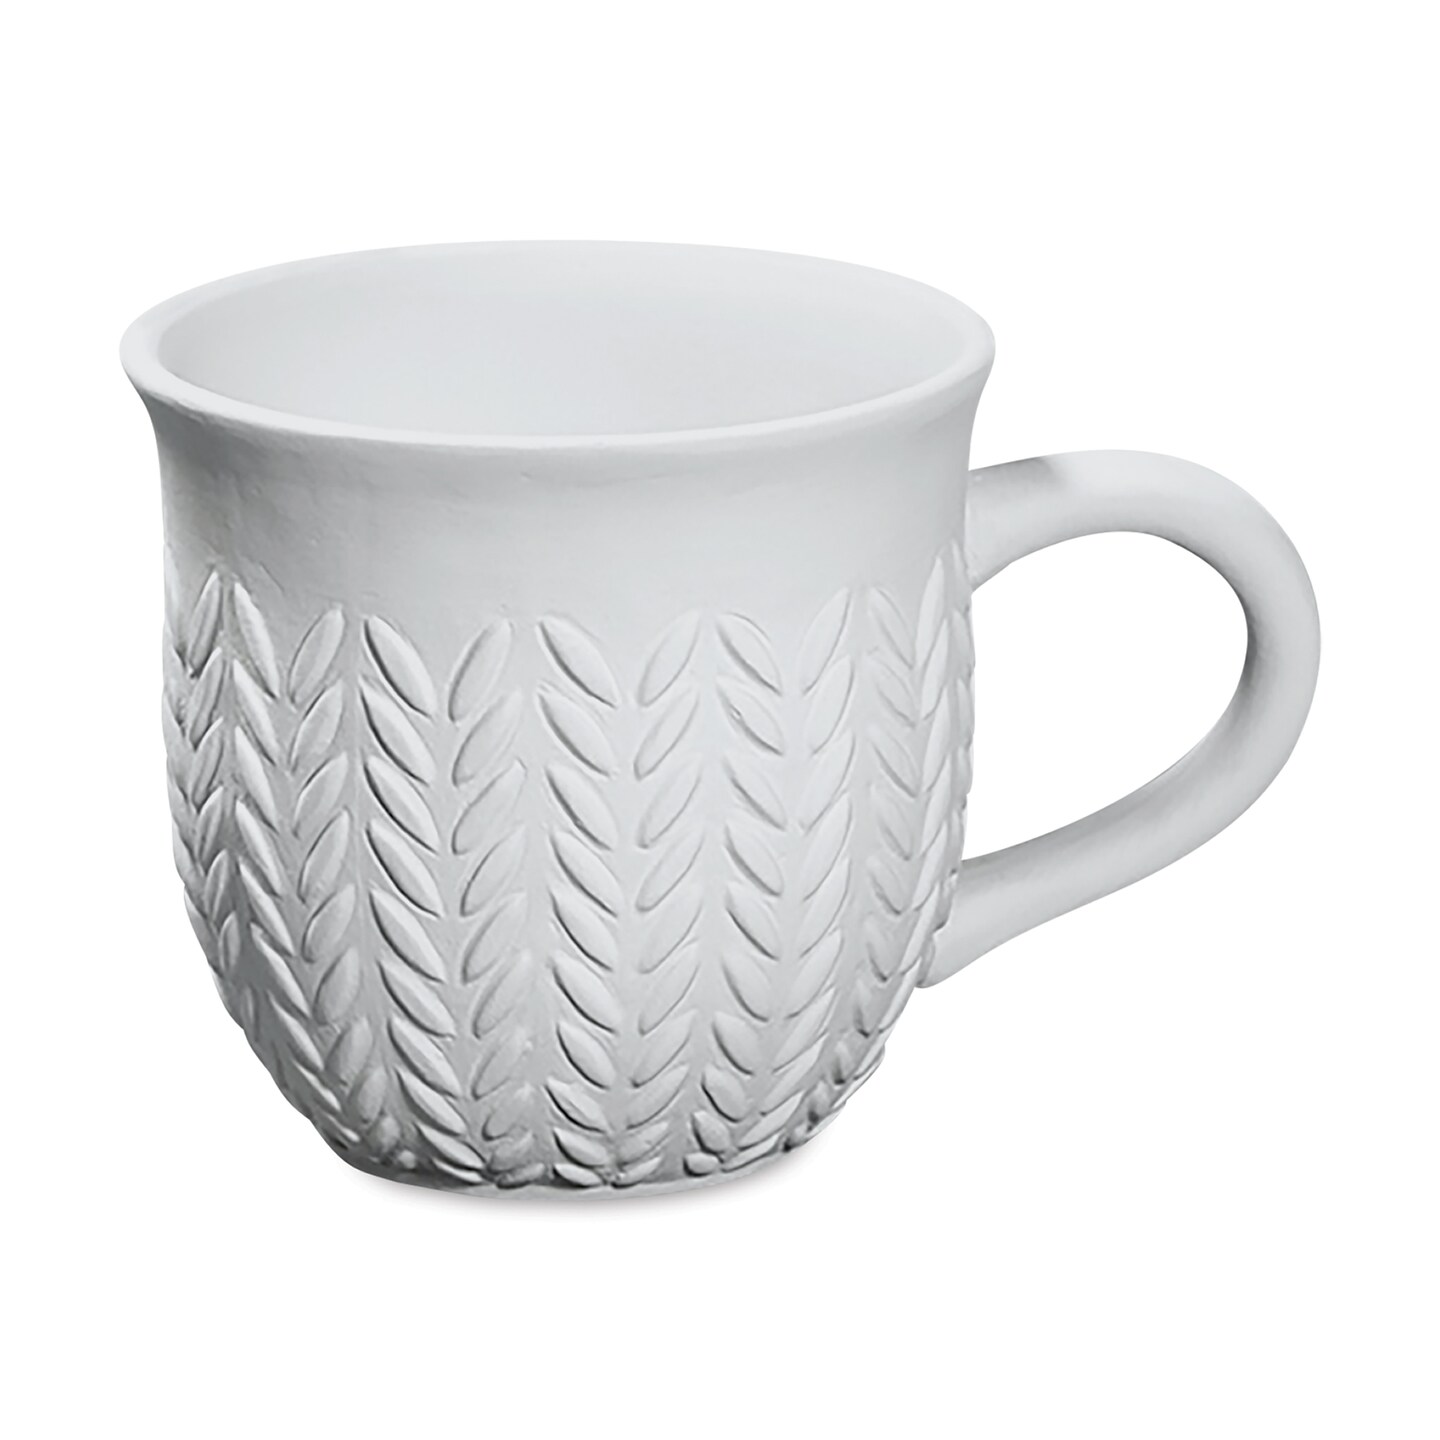 Mayco Earthenware Bisque Mugs - Stitched, Pkg of 6